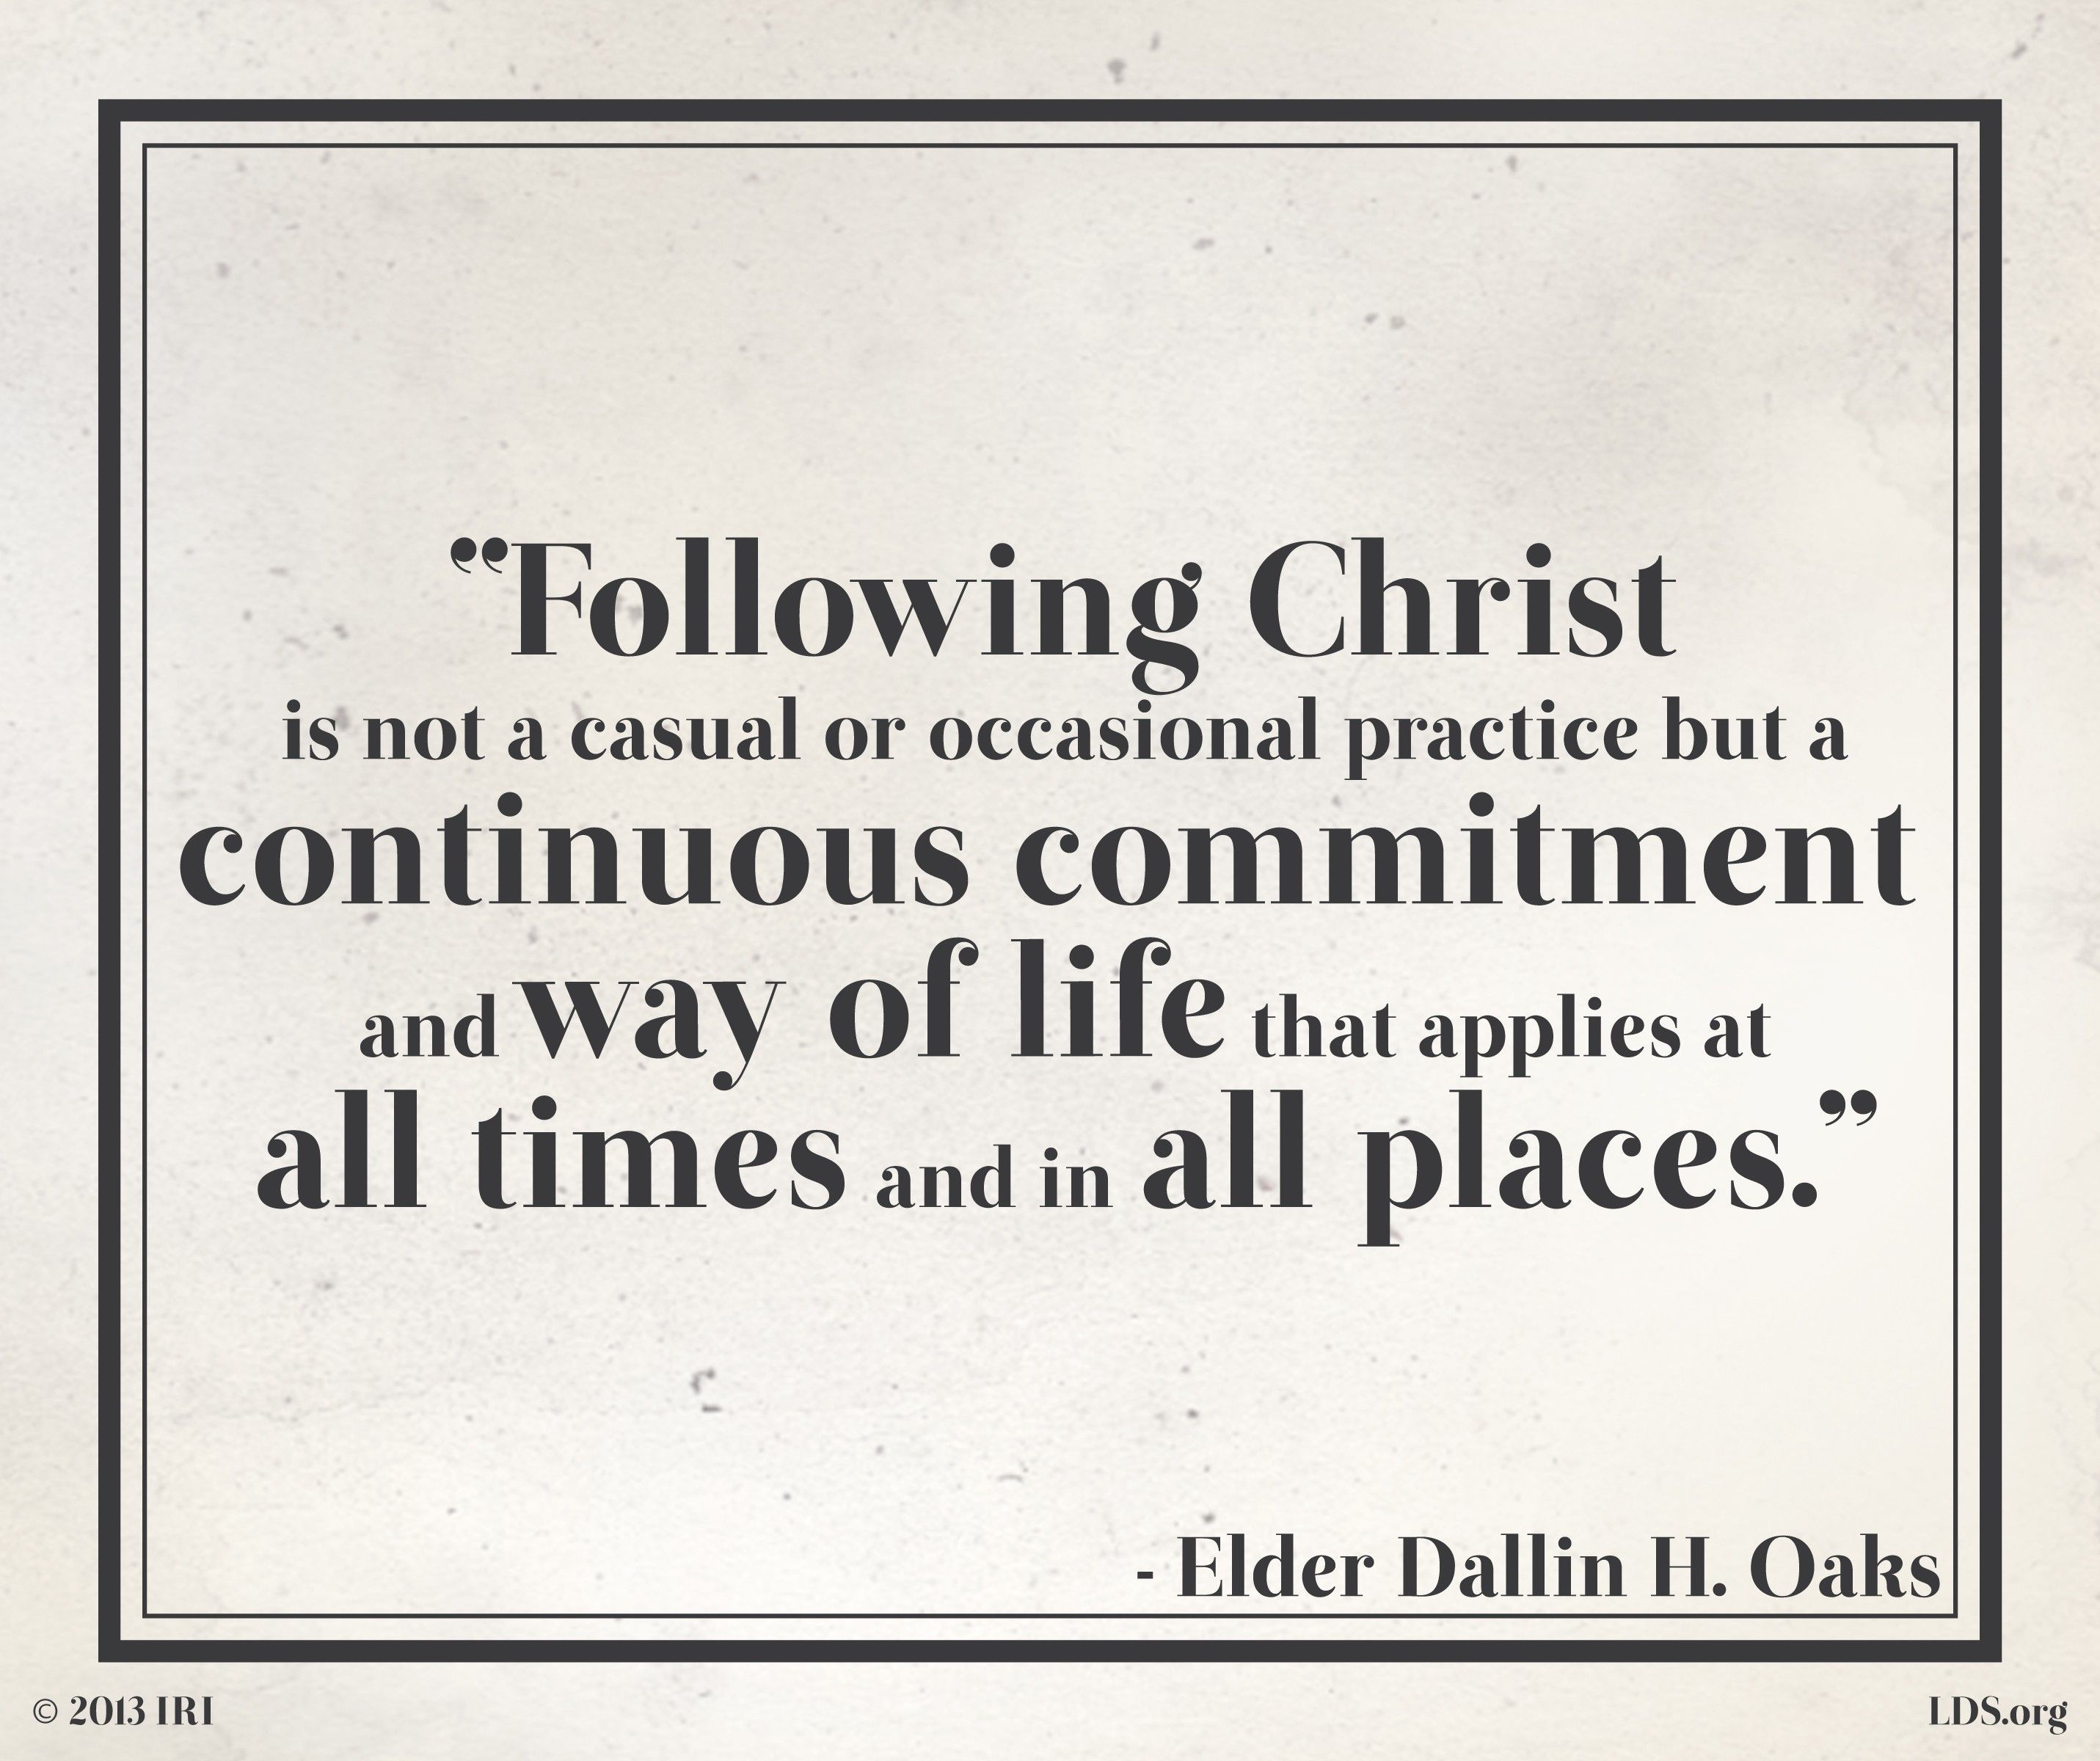 “Following Christ is not a casual or occasional practice but a continuous commitment and way of life that applies at all times and in all places.”—Elder Dallin H. Oaks, “Followers of Christ” © undefined ipCode 1.